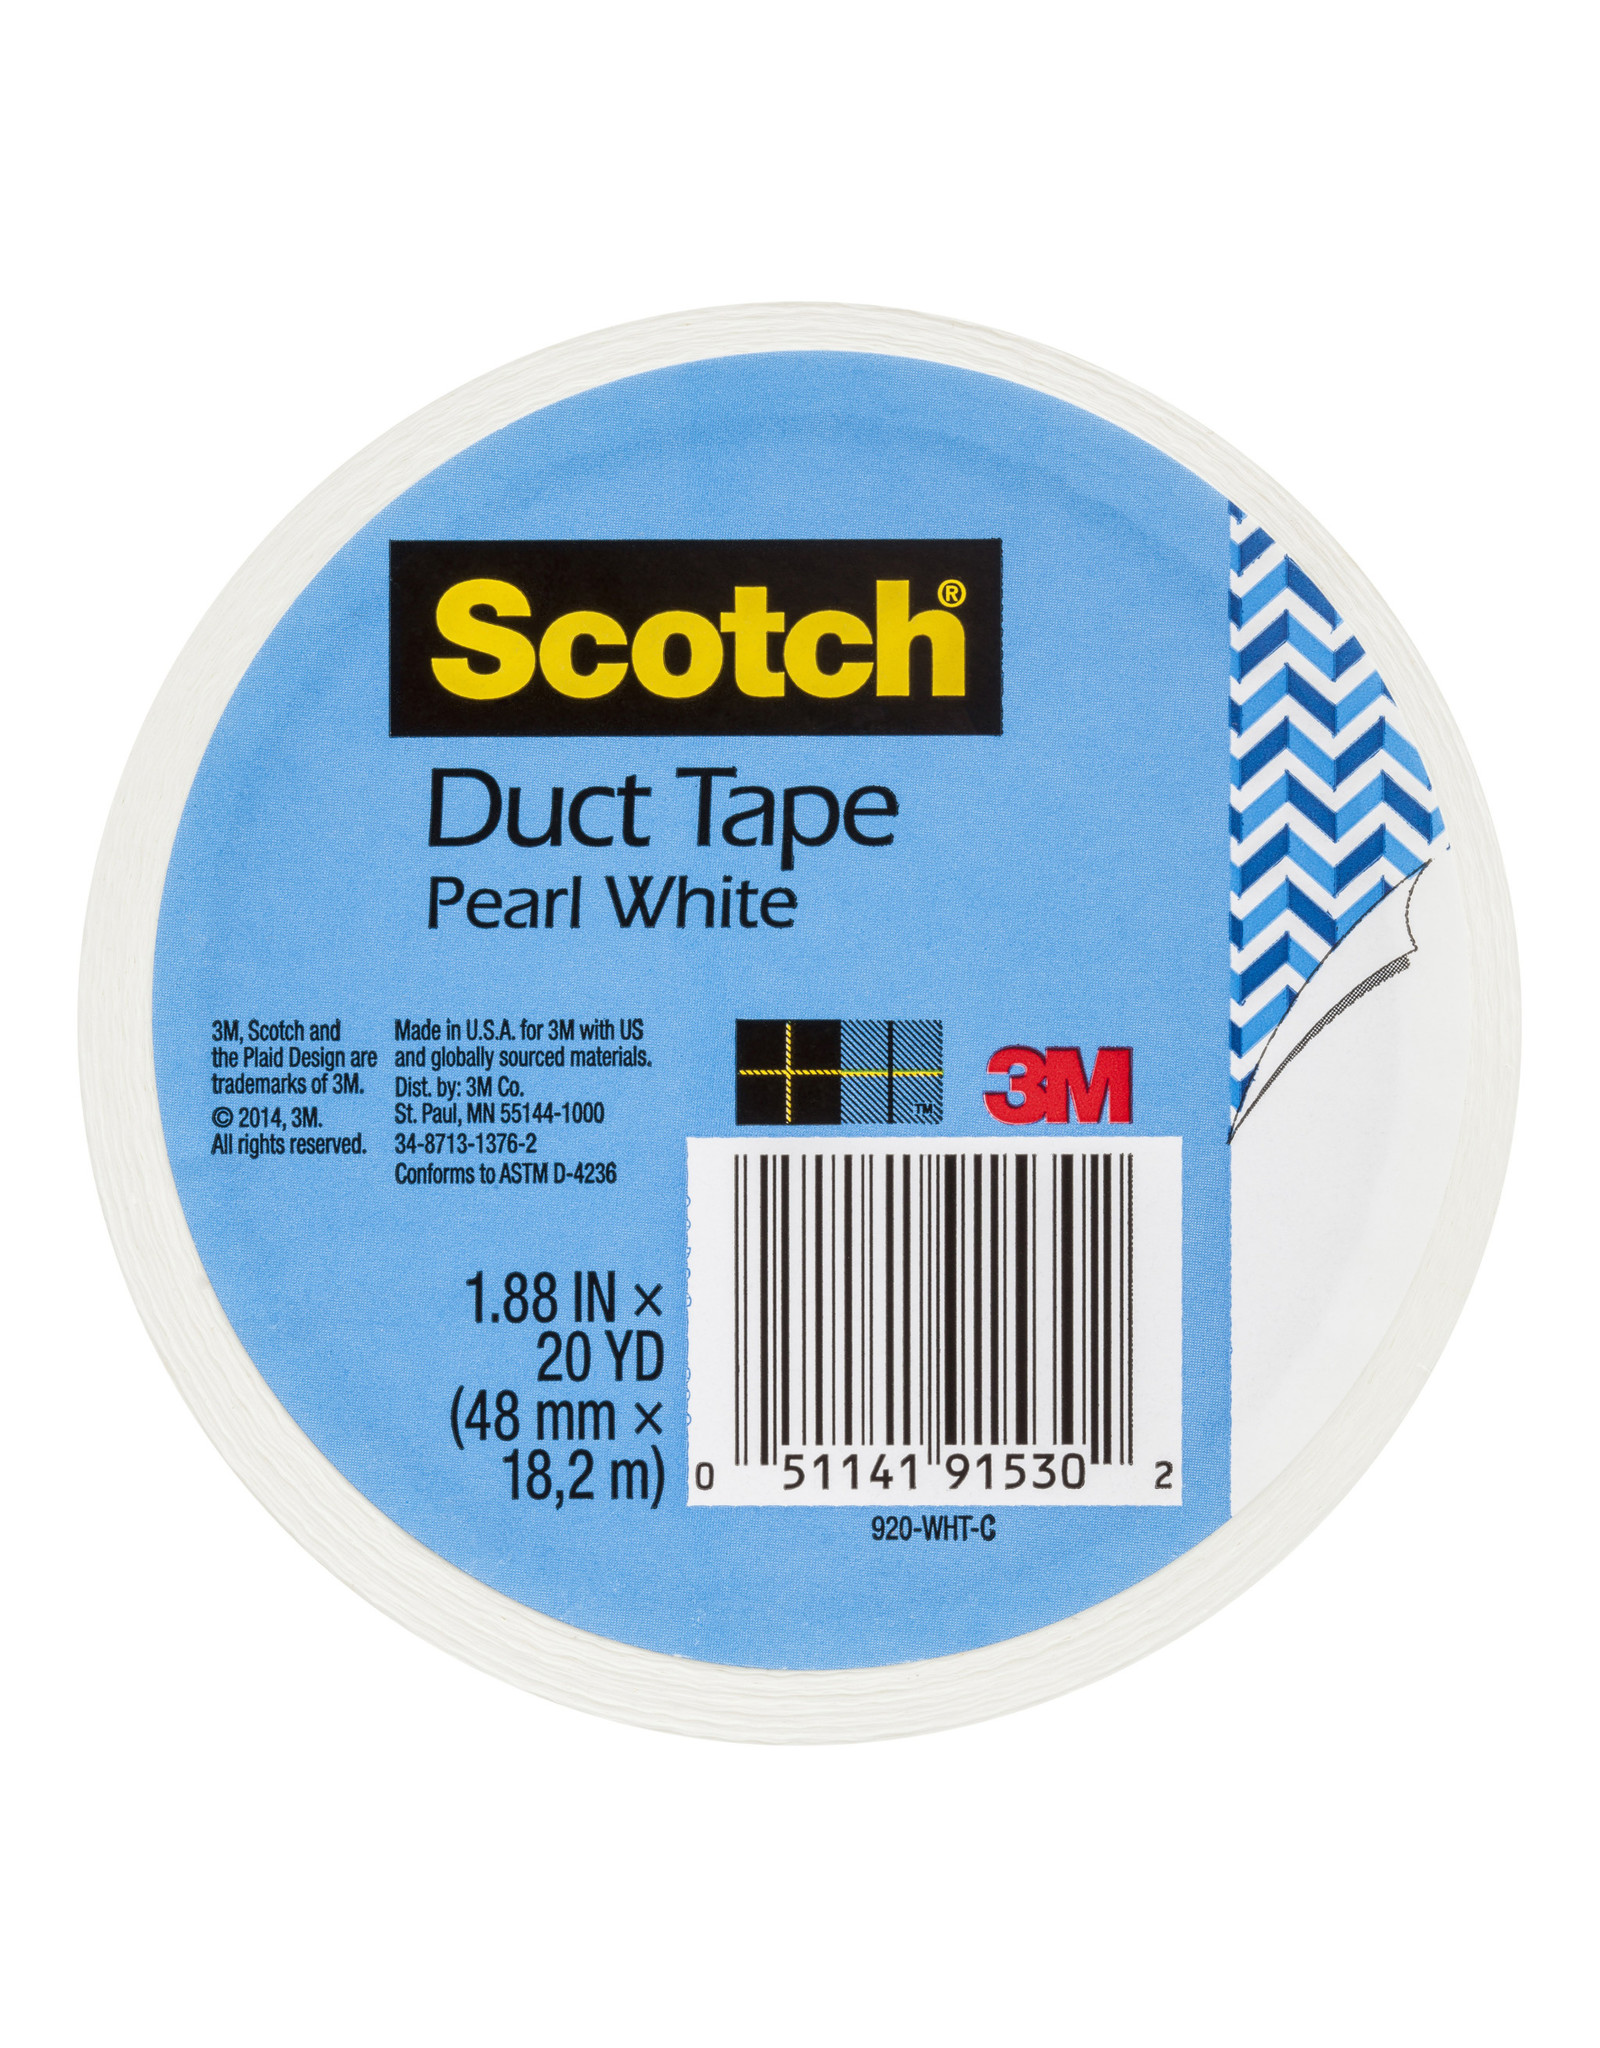 Scotch Scotch Duct Tapes for Artists, Pearl White - 1 7/8" x 20 yds